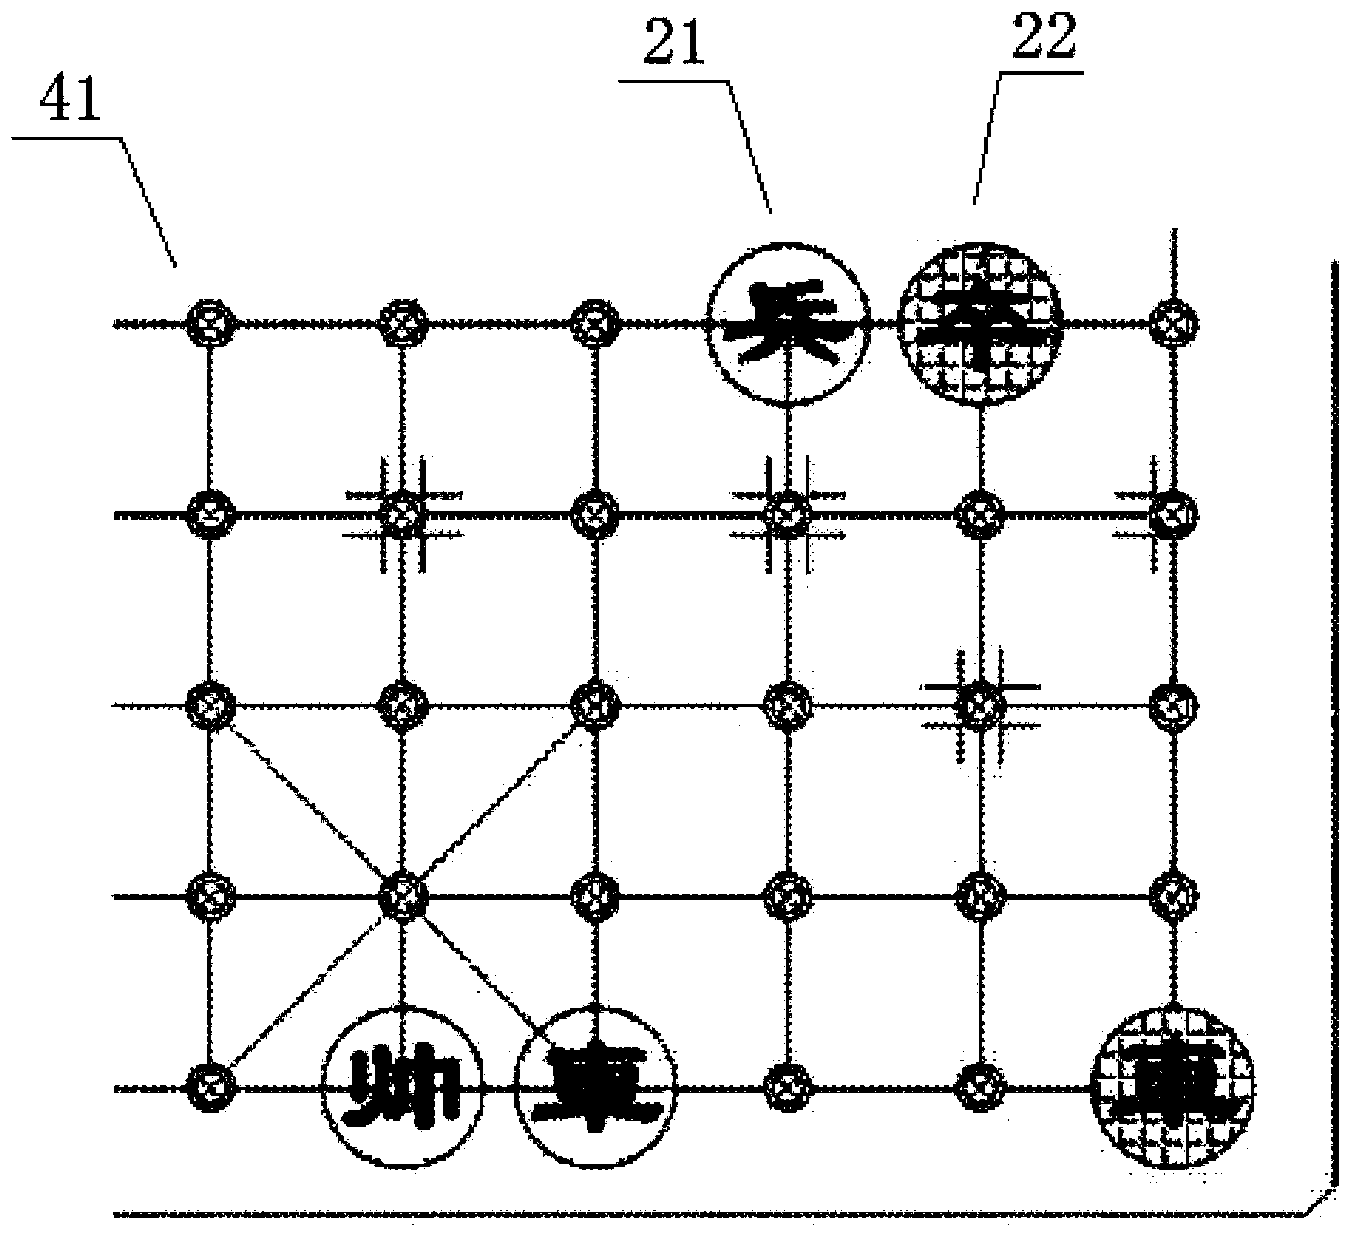 Electronic checkerboard system